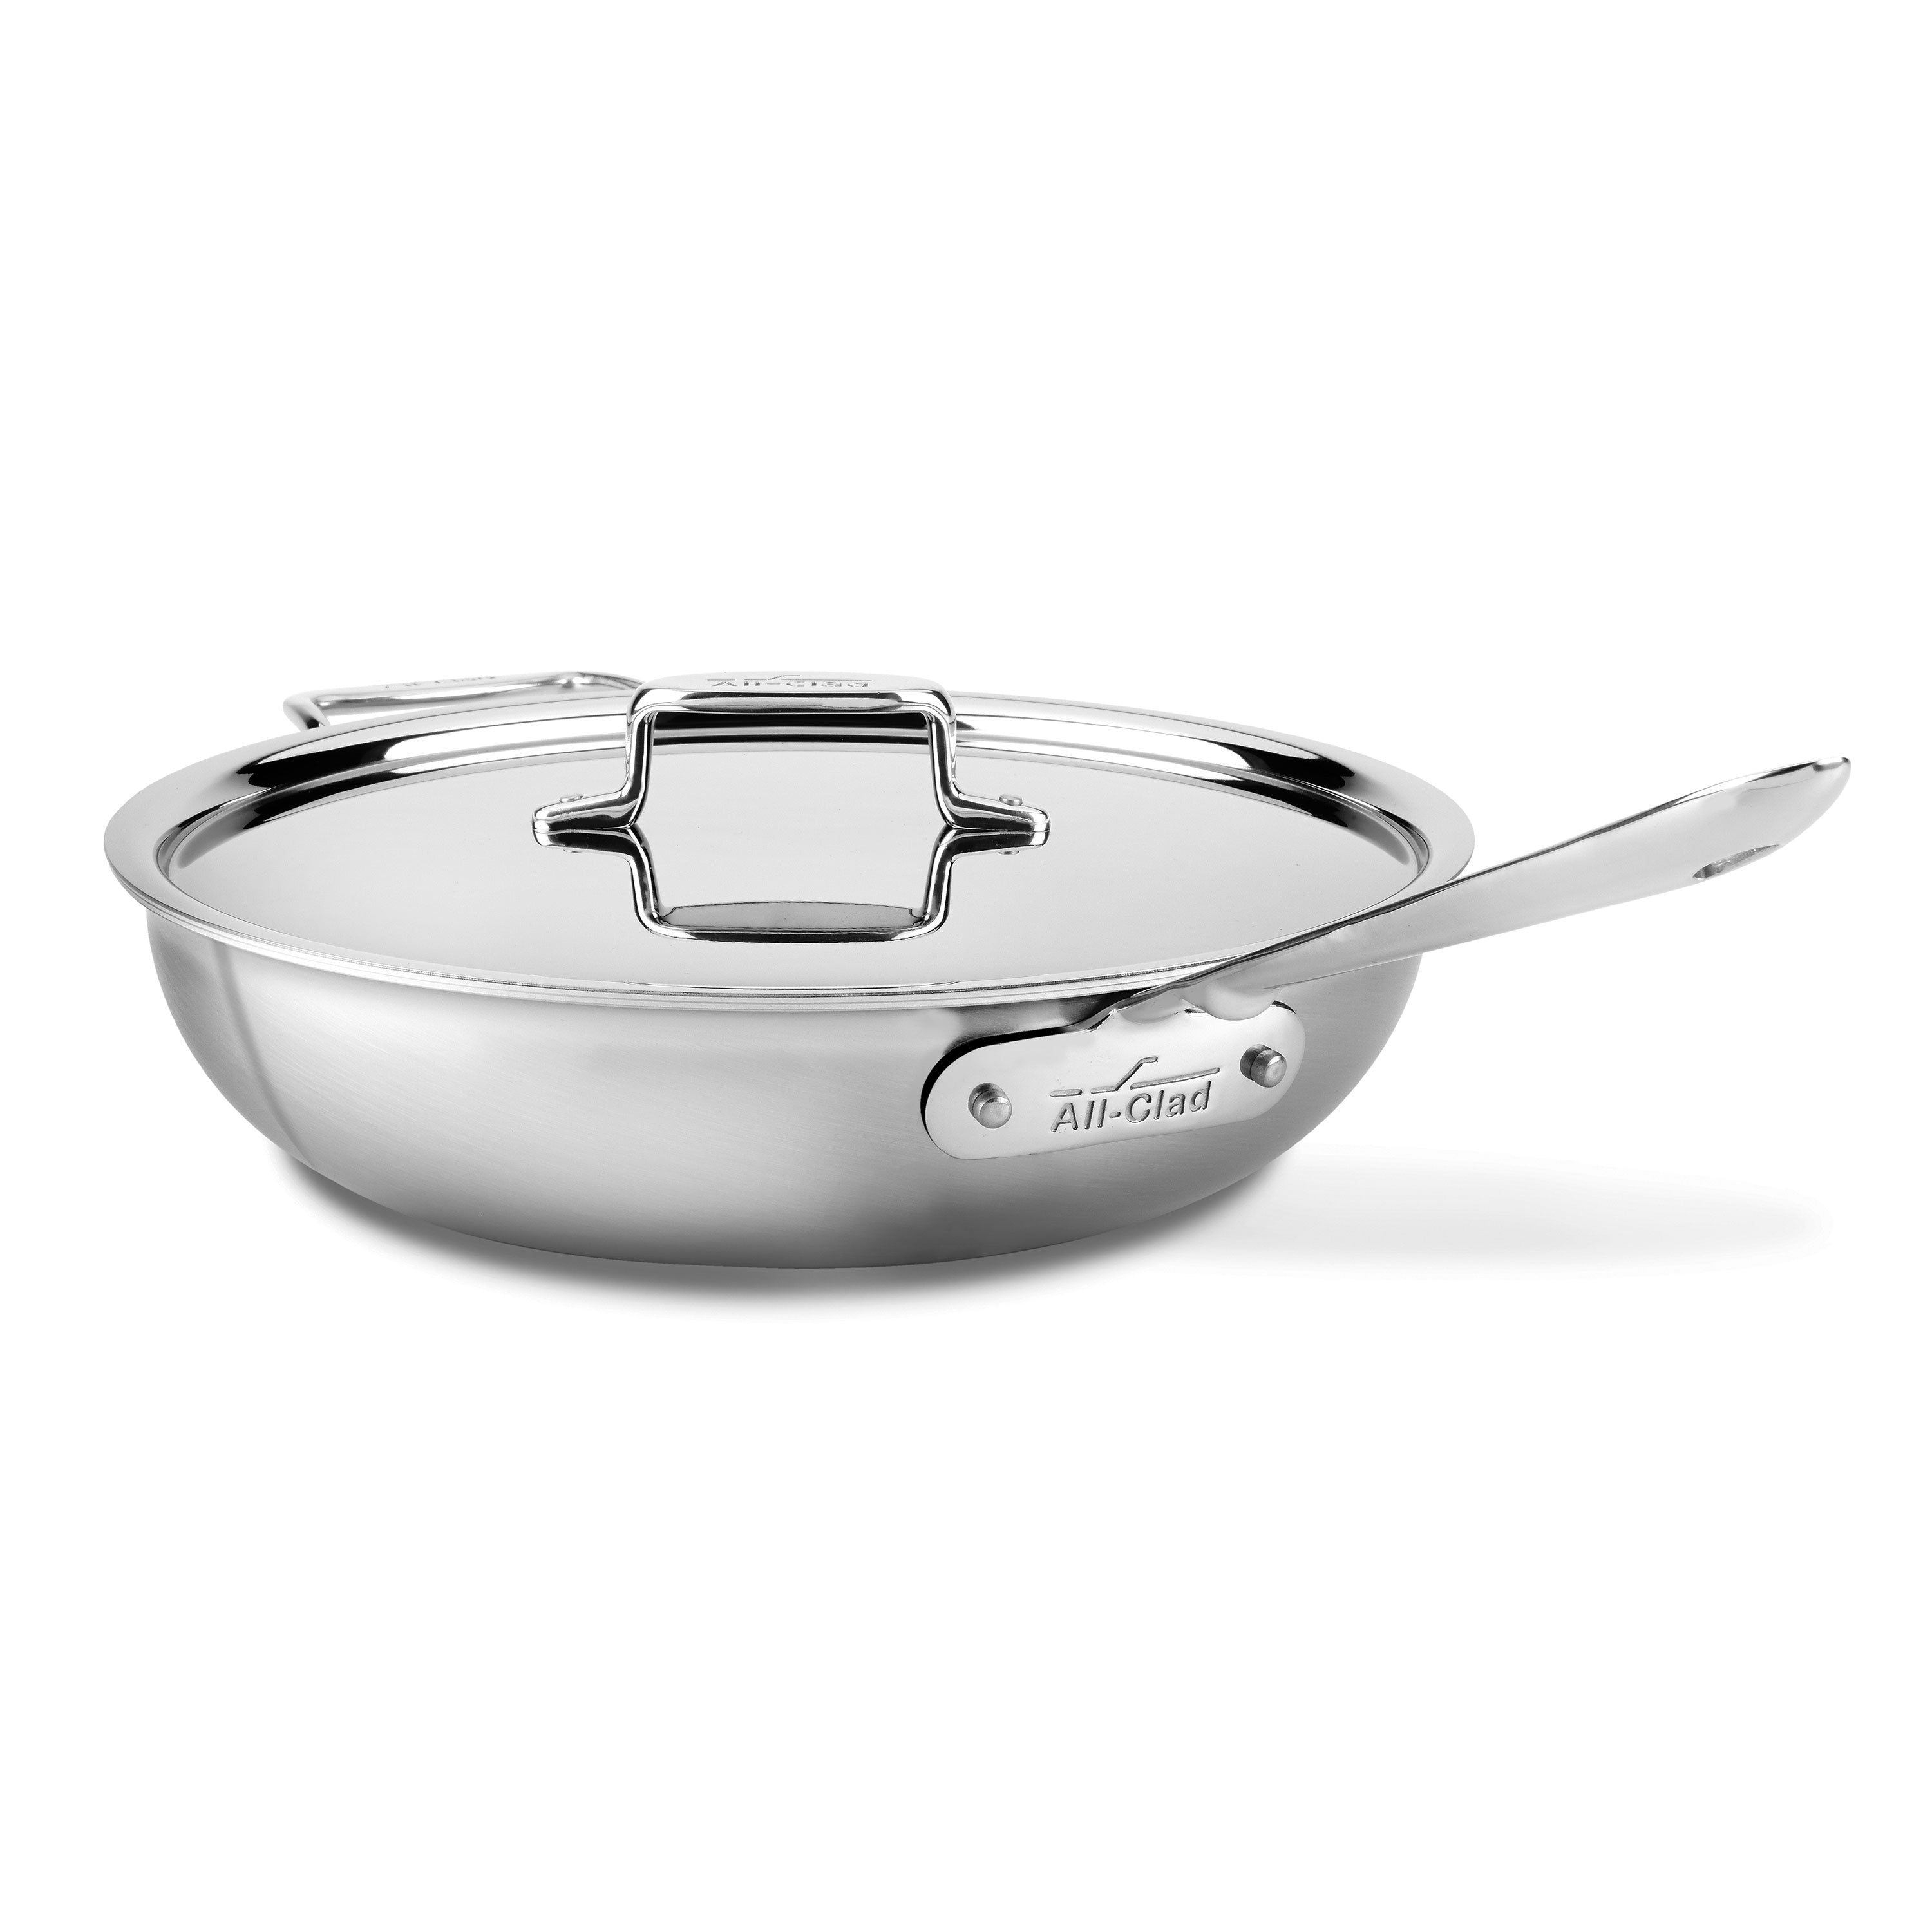 All-Clad D5 Brushed Stainless Steel 4.5 Quart Universal Pan